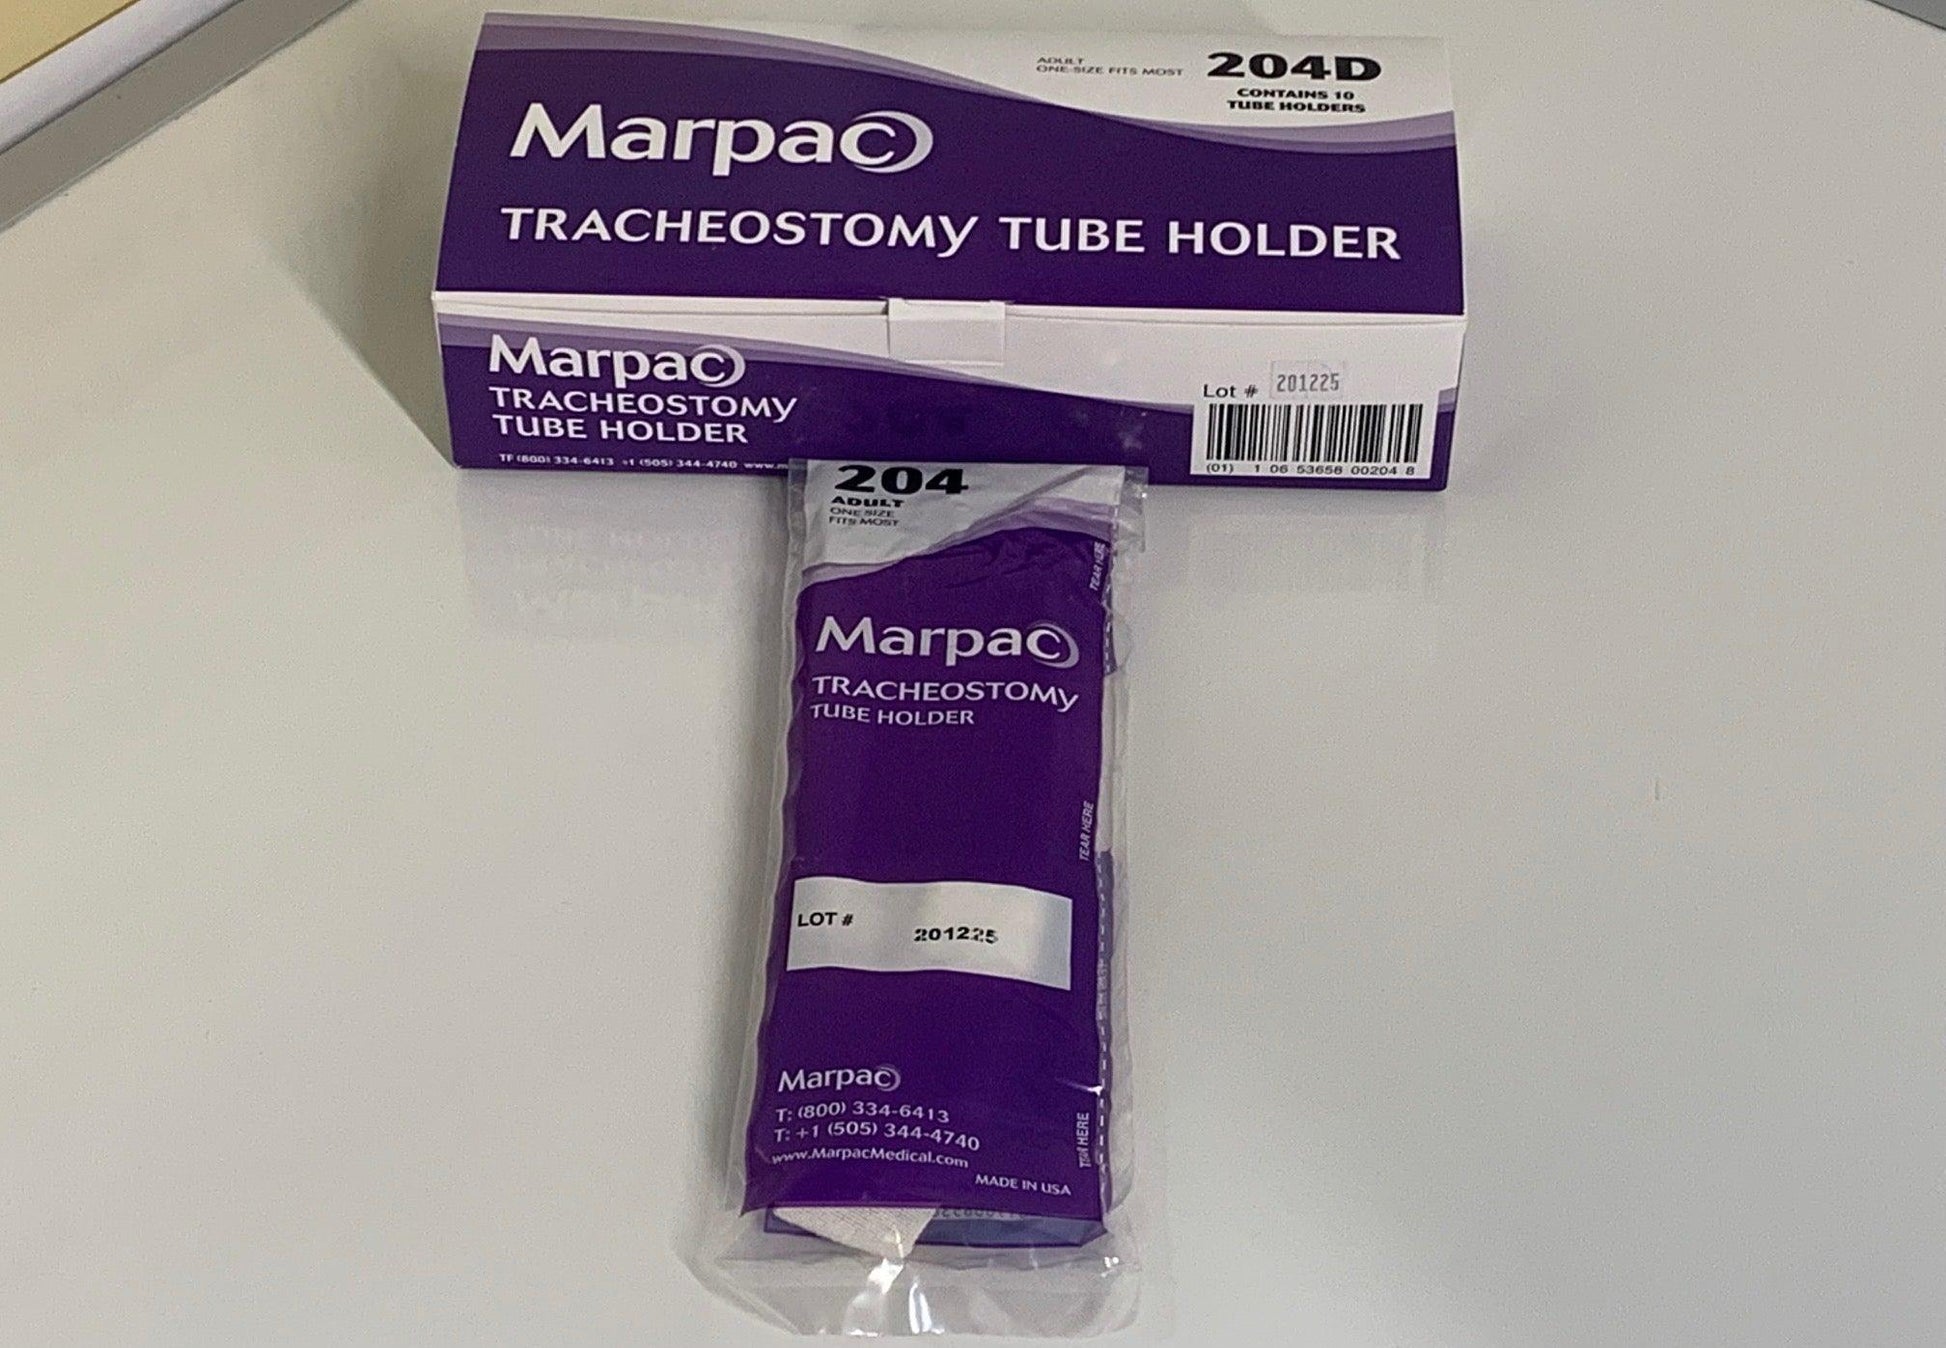 NEW 10PK Adult Marpac Tracheostomy Tube Holder Only Ref PN 204D - MBR Medicals